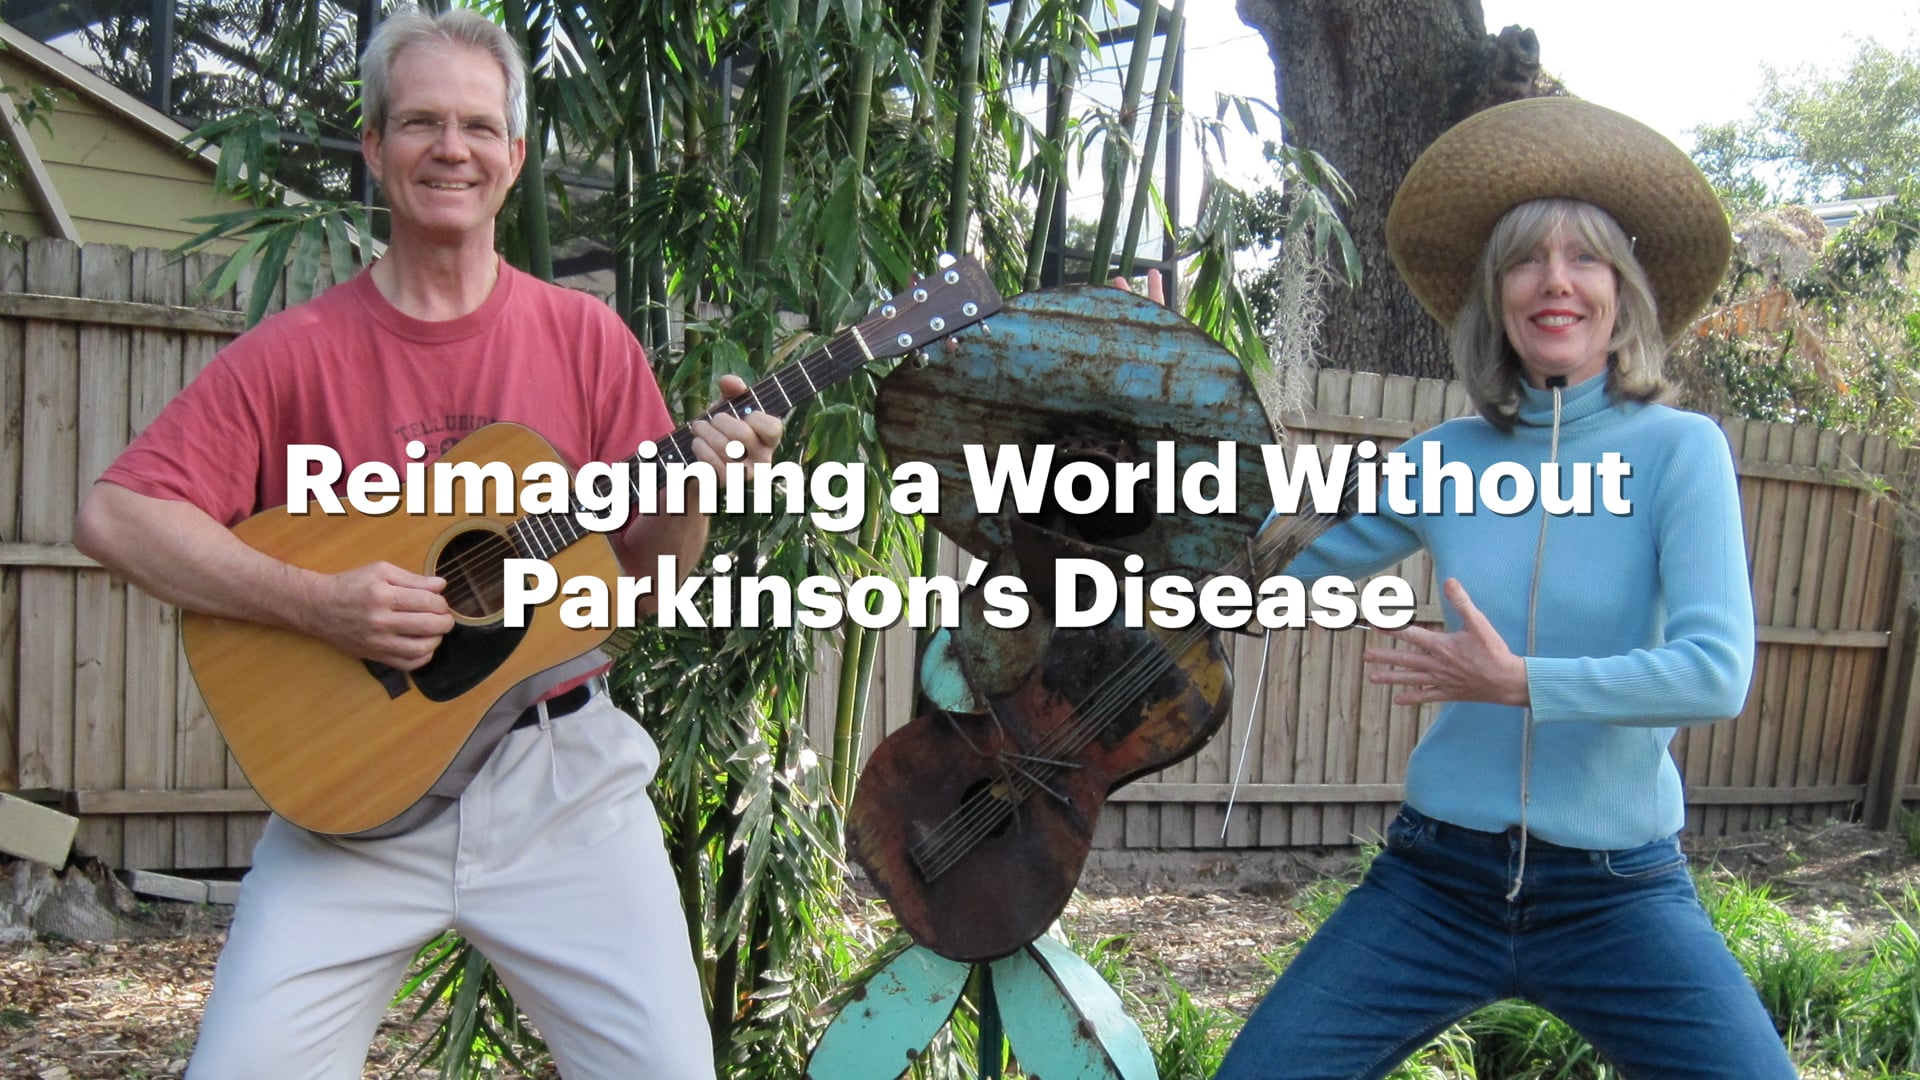 Reimagining a World Without Parkinson's Disease